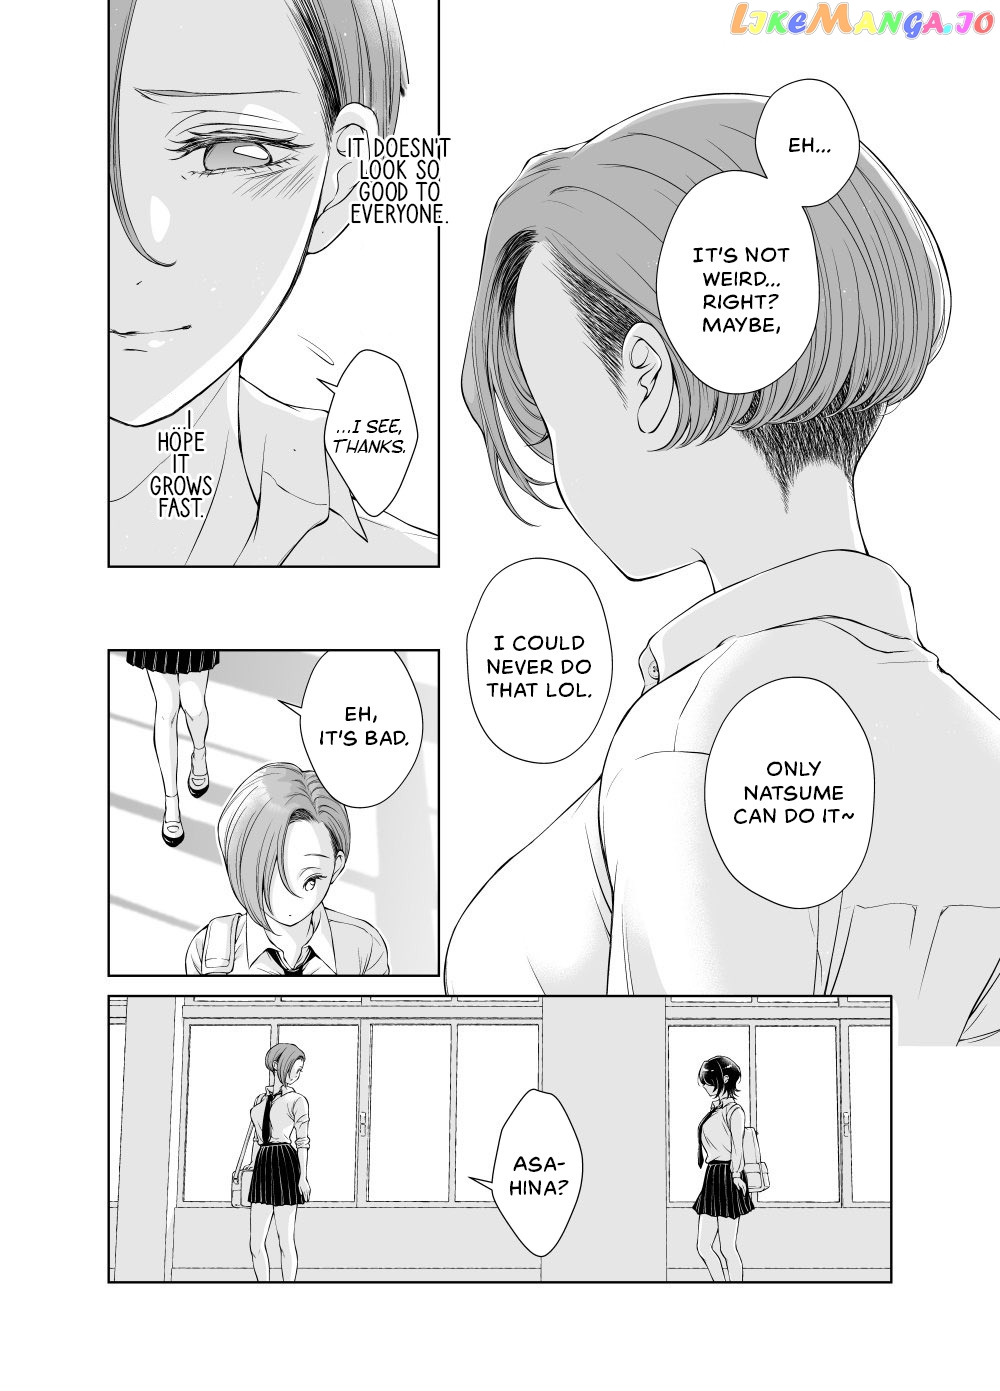 My Girlfriend’s Not Here Today chapter 0.1 - page 3